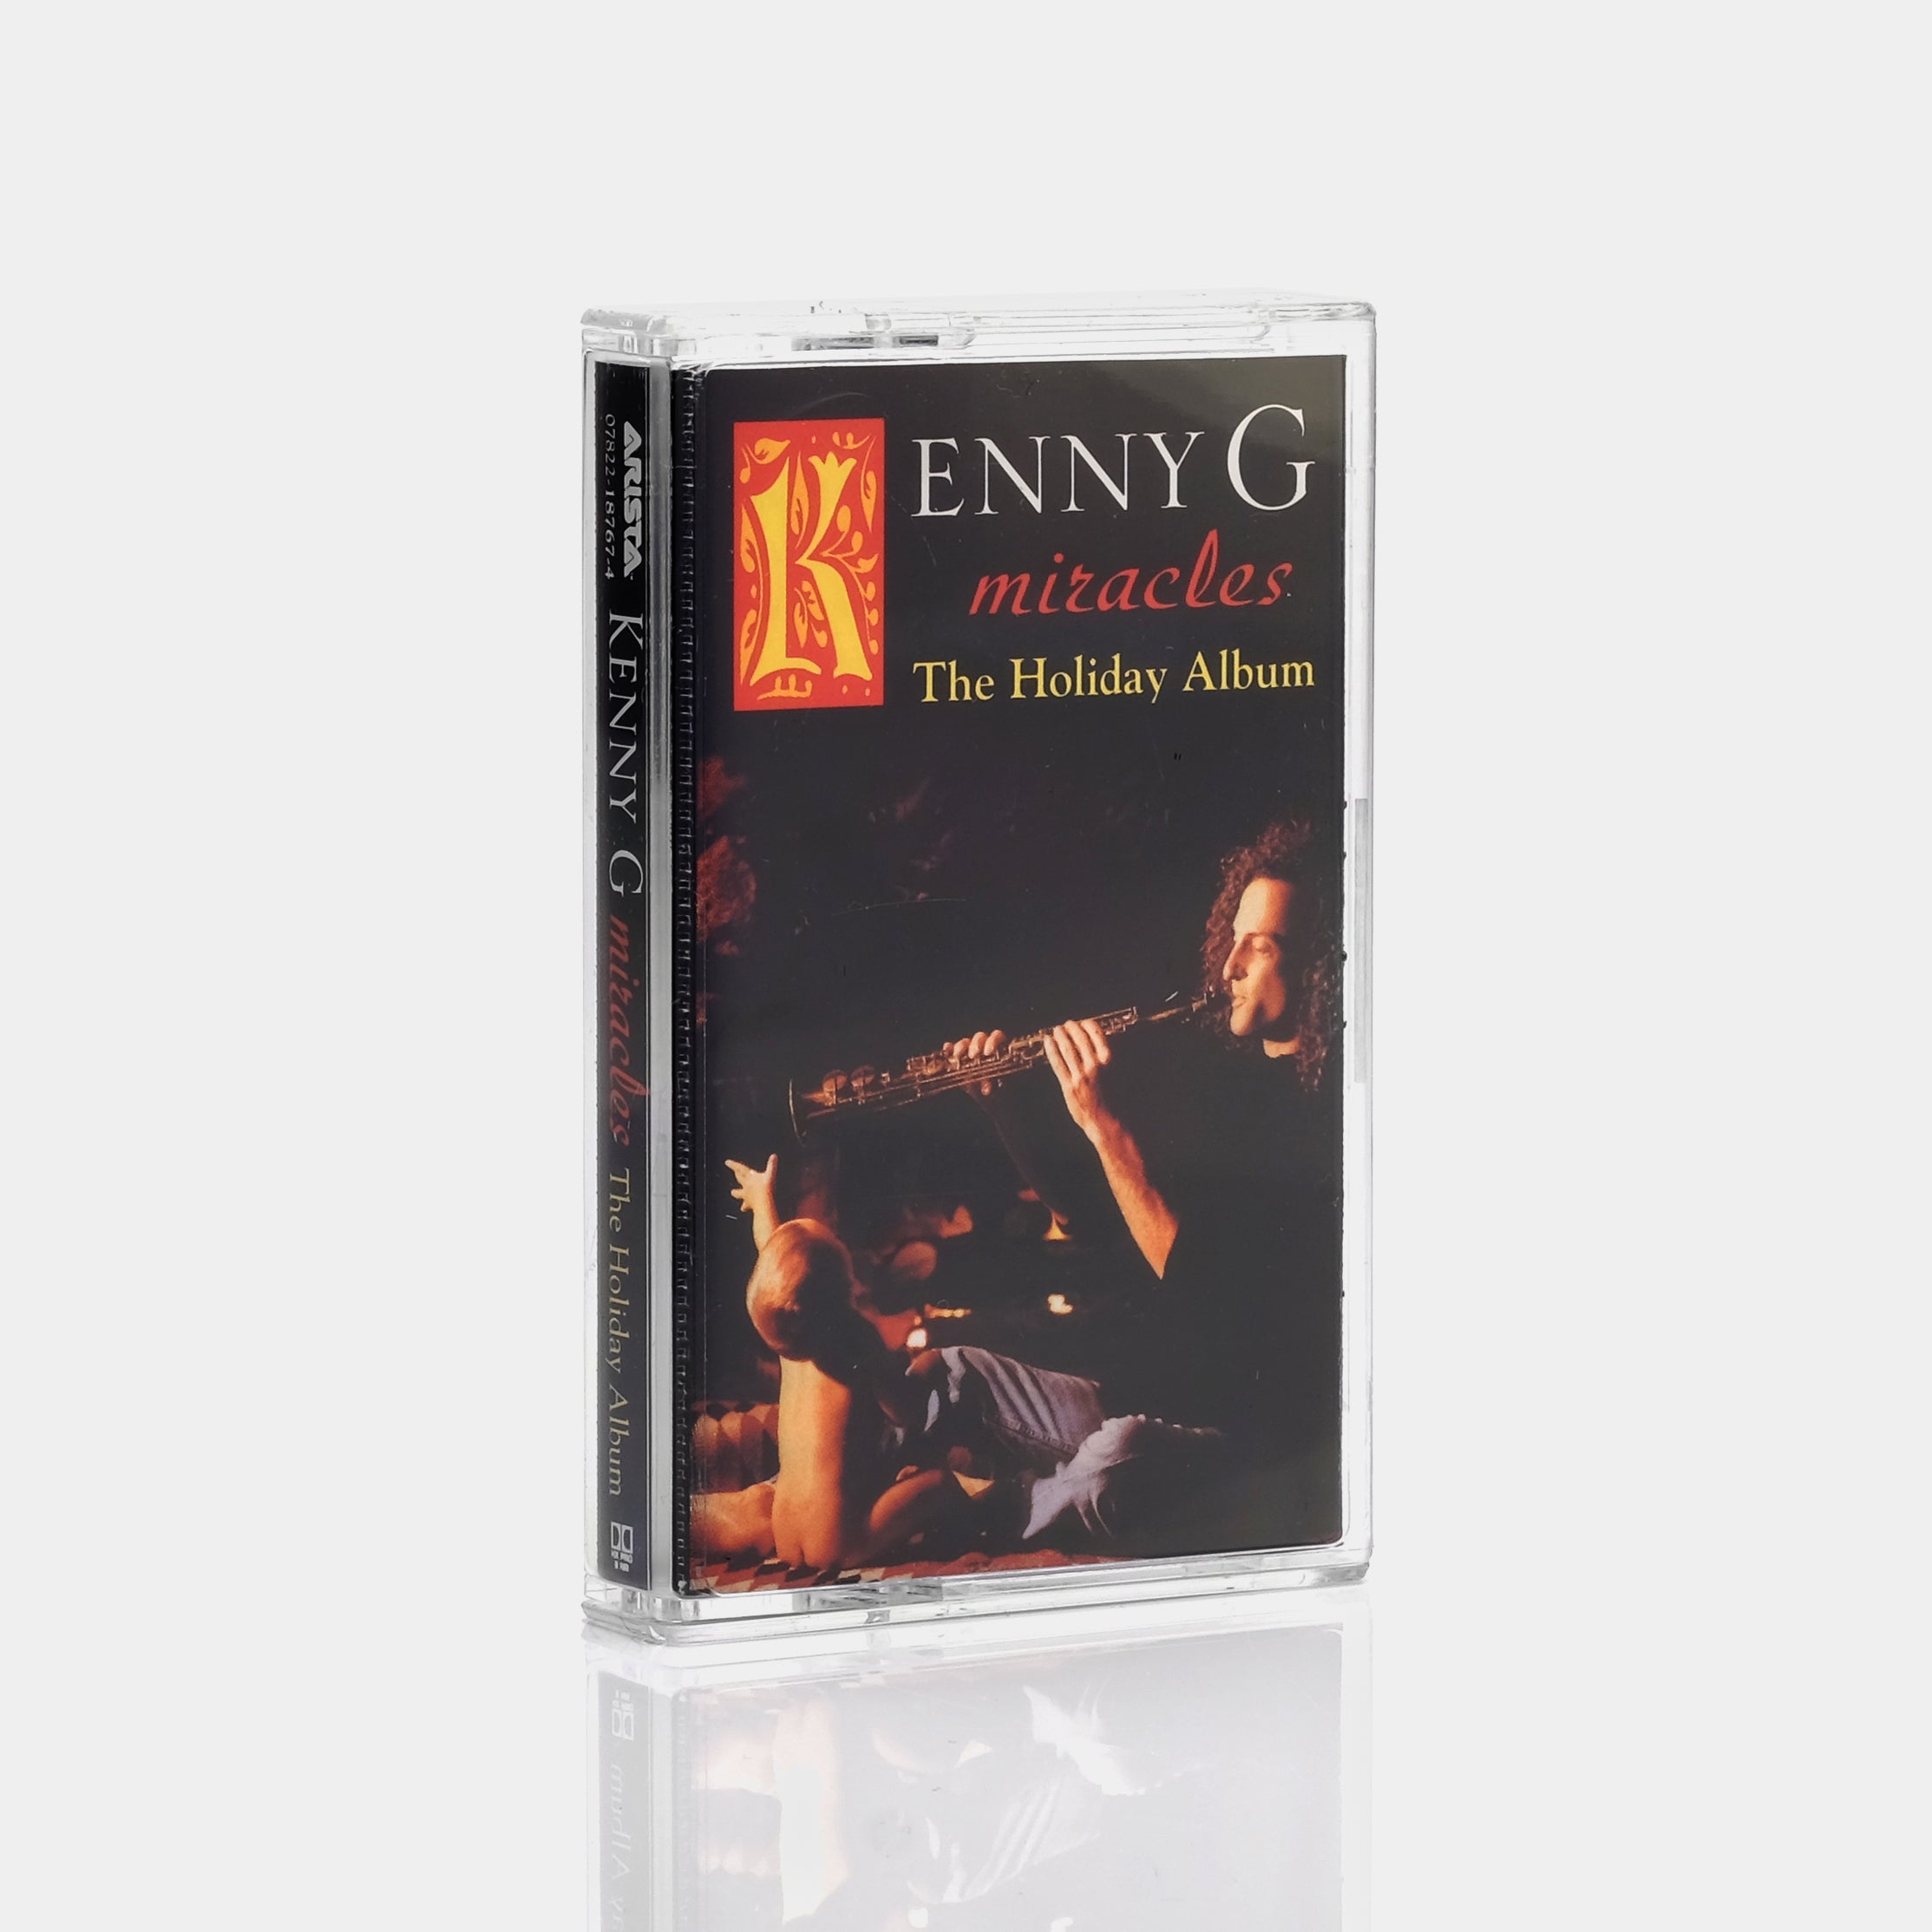 Kenny G - Miracles: The Holiday Album Cassette Tape